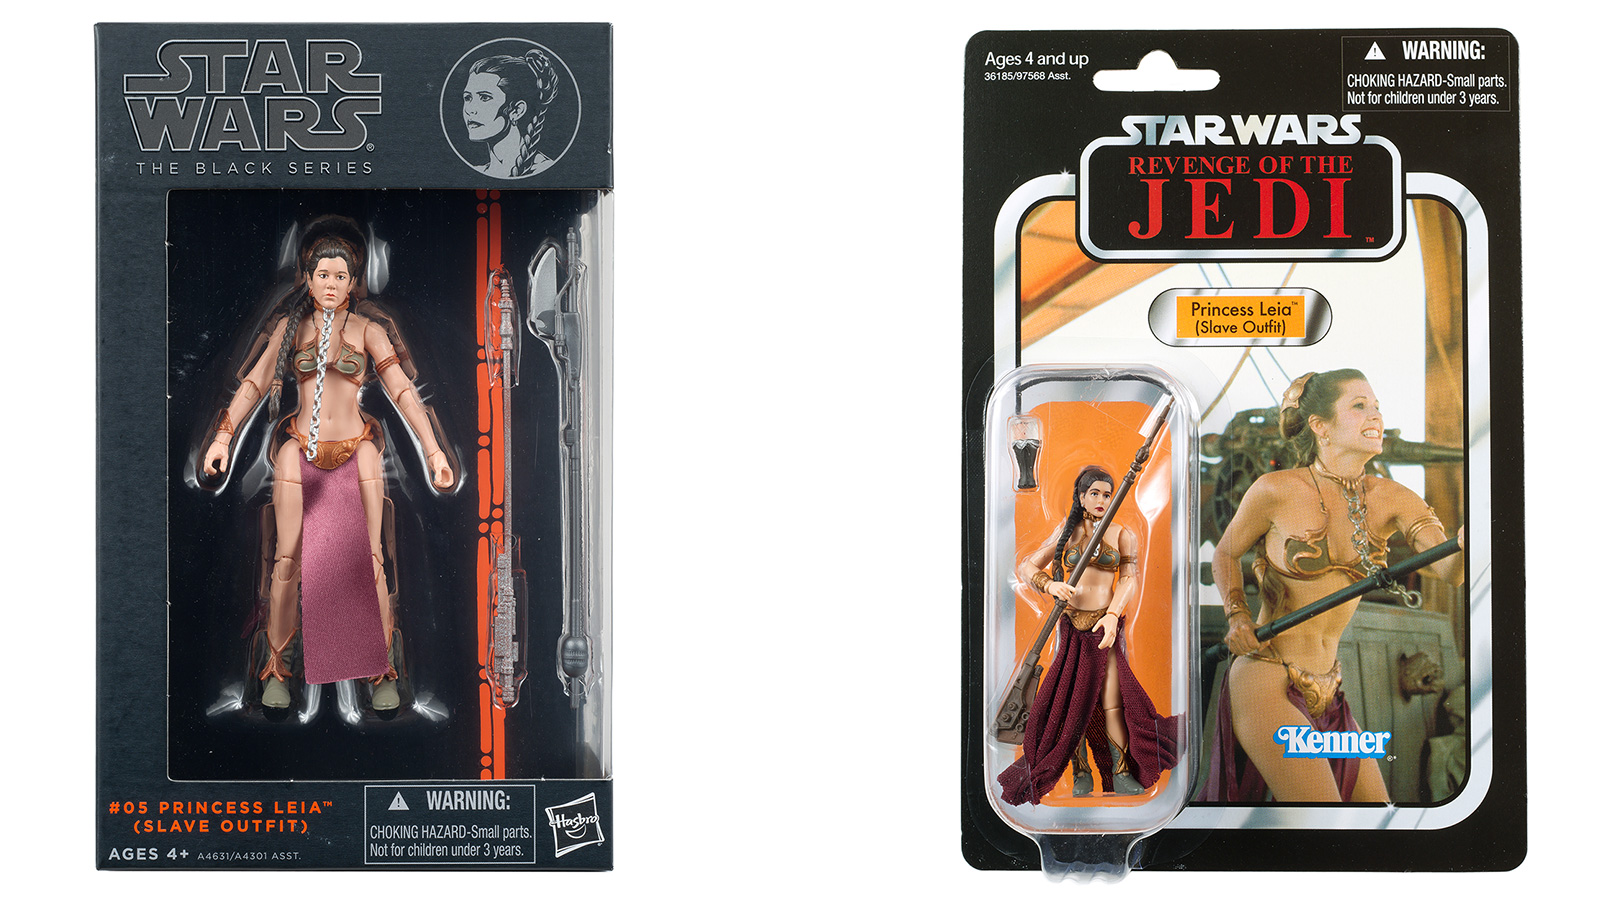 The Figure Hasbro Should Have Redone to Celebrate The 40th Anniversary Of Return Of The Jedi?